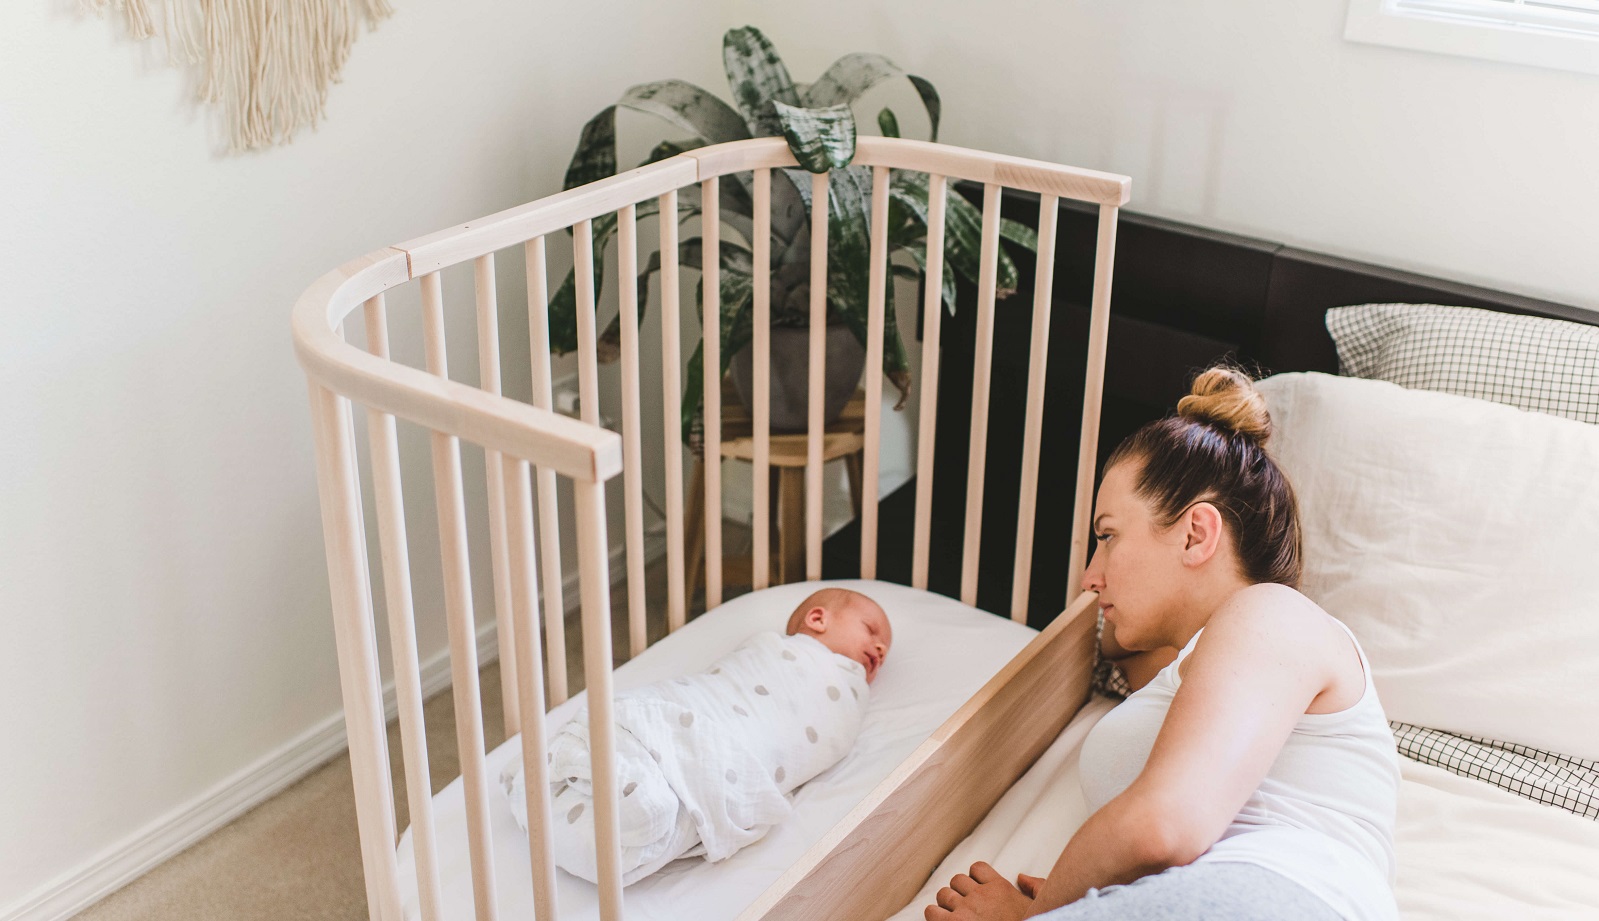 Is Co-Sleeping Bad? Let’s Talk About It